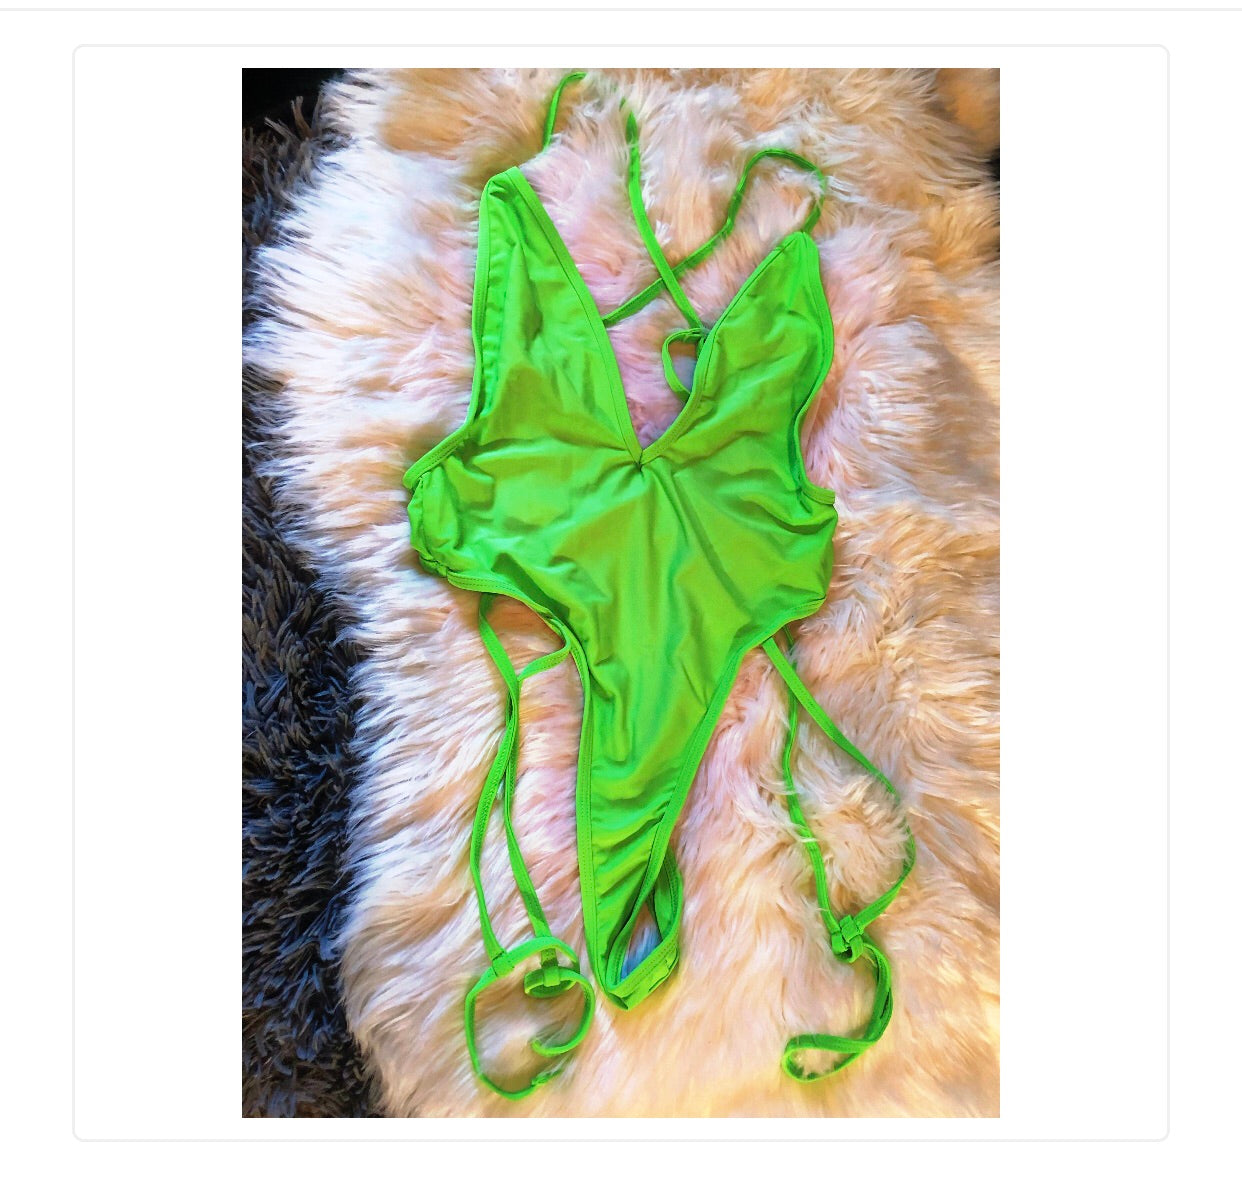 Neon green one piece thong